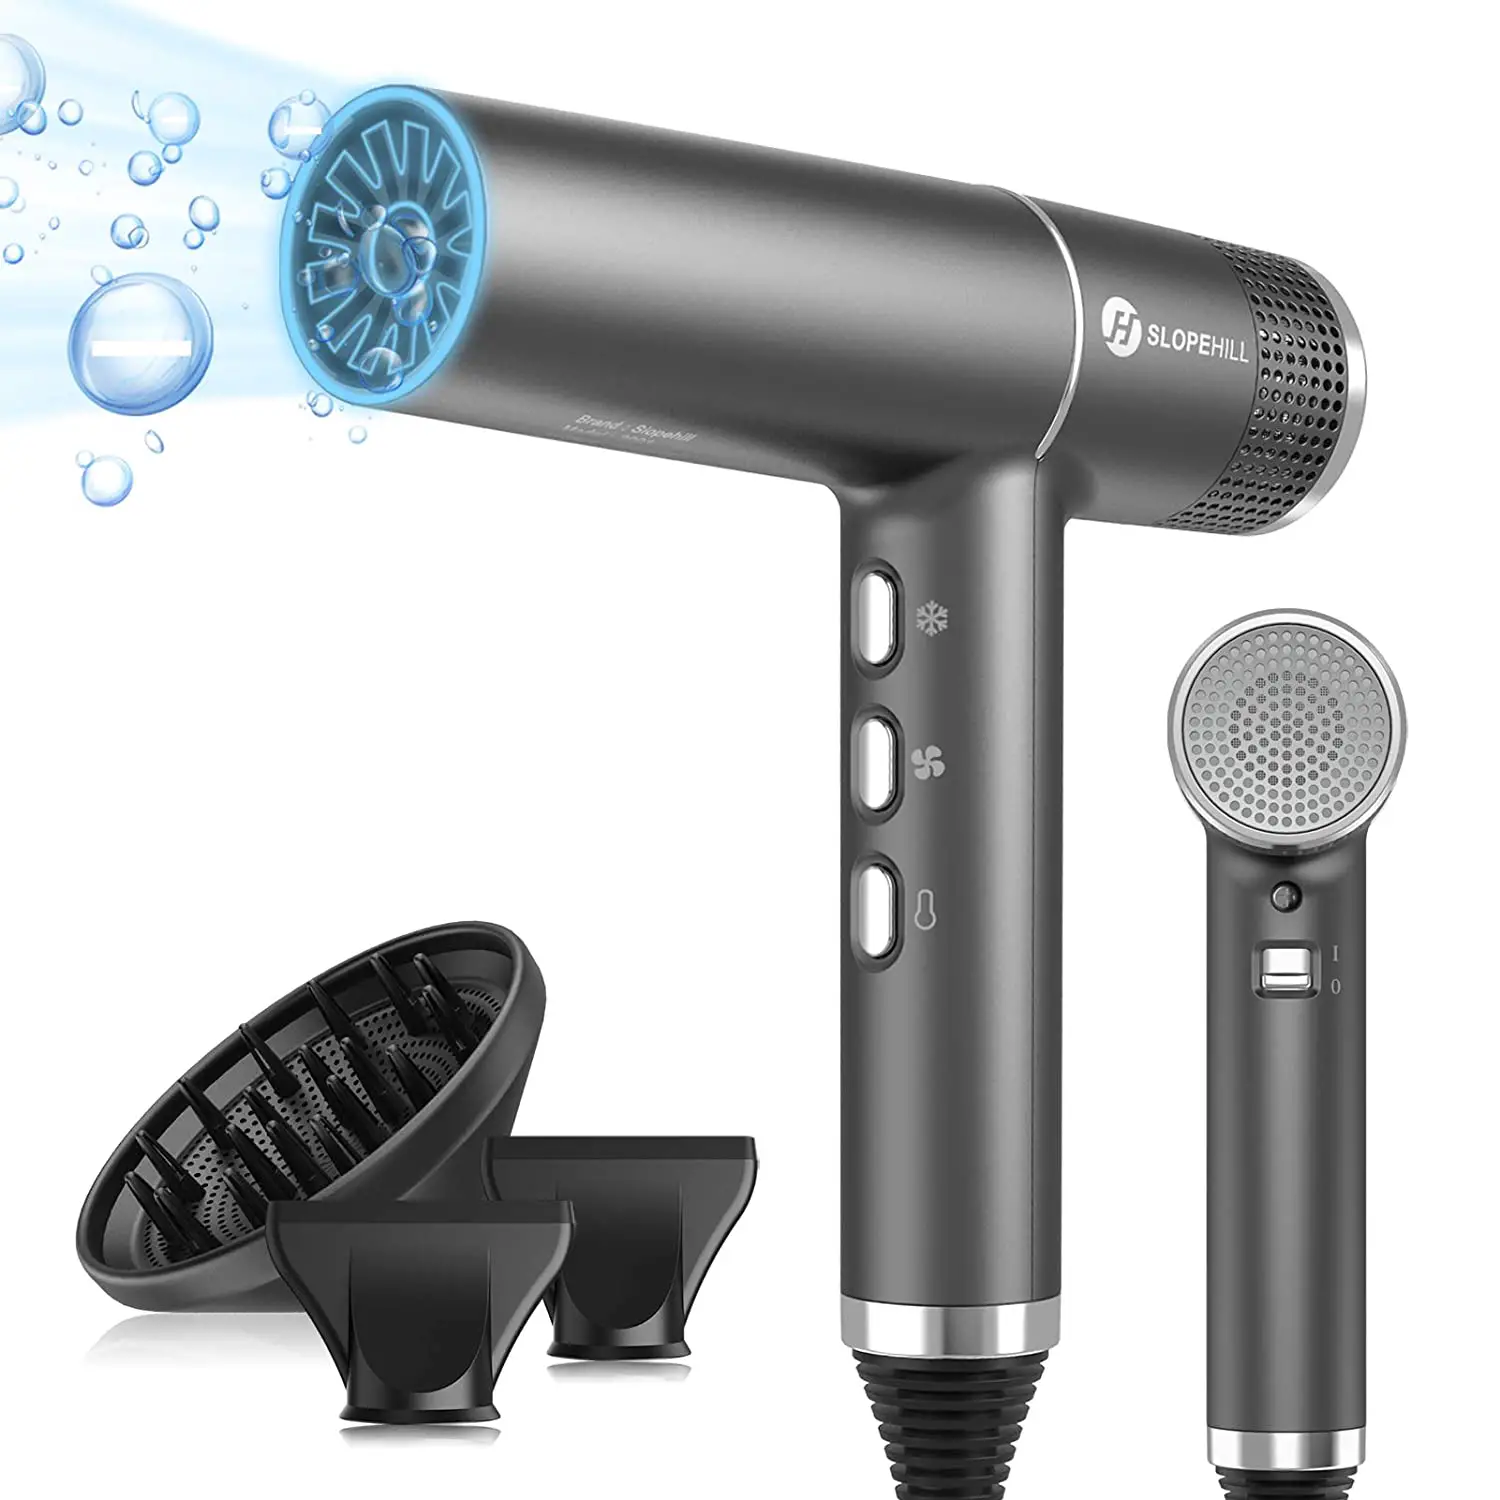 slopehill Hair Dryer with Unique Brushless Motor | IQ Perfetto | Innovative Microfilter | Oxy Active Technology | Led Display (Gray) safely dry damaged hair